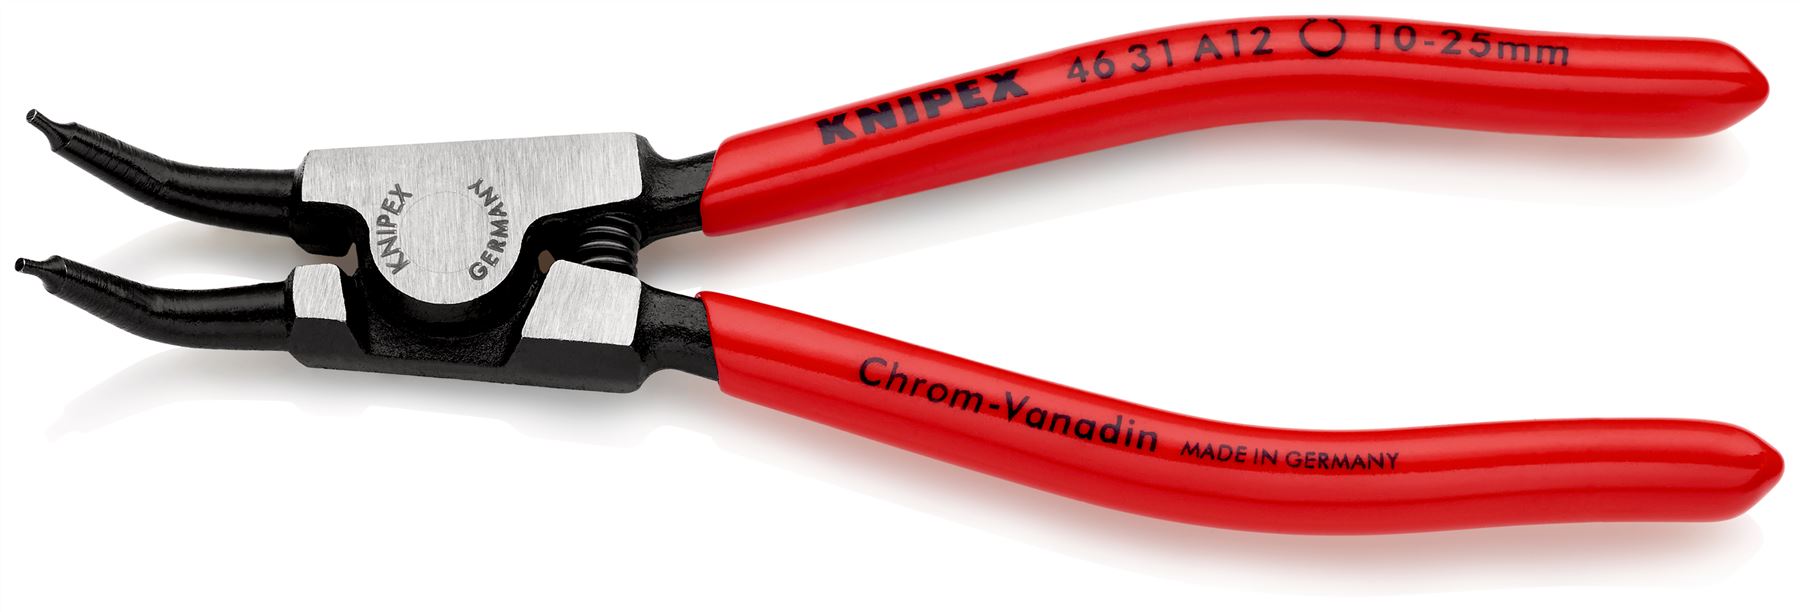 KNIPEX Circlip Pliers for External Circlips on Shafts 45° Angled 130mm 1.3mm Diameter Tips 46 31 A12